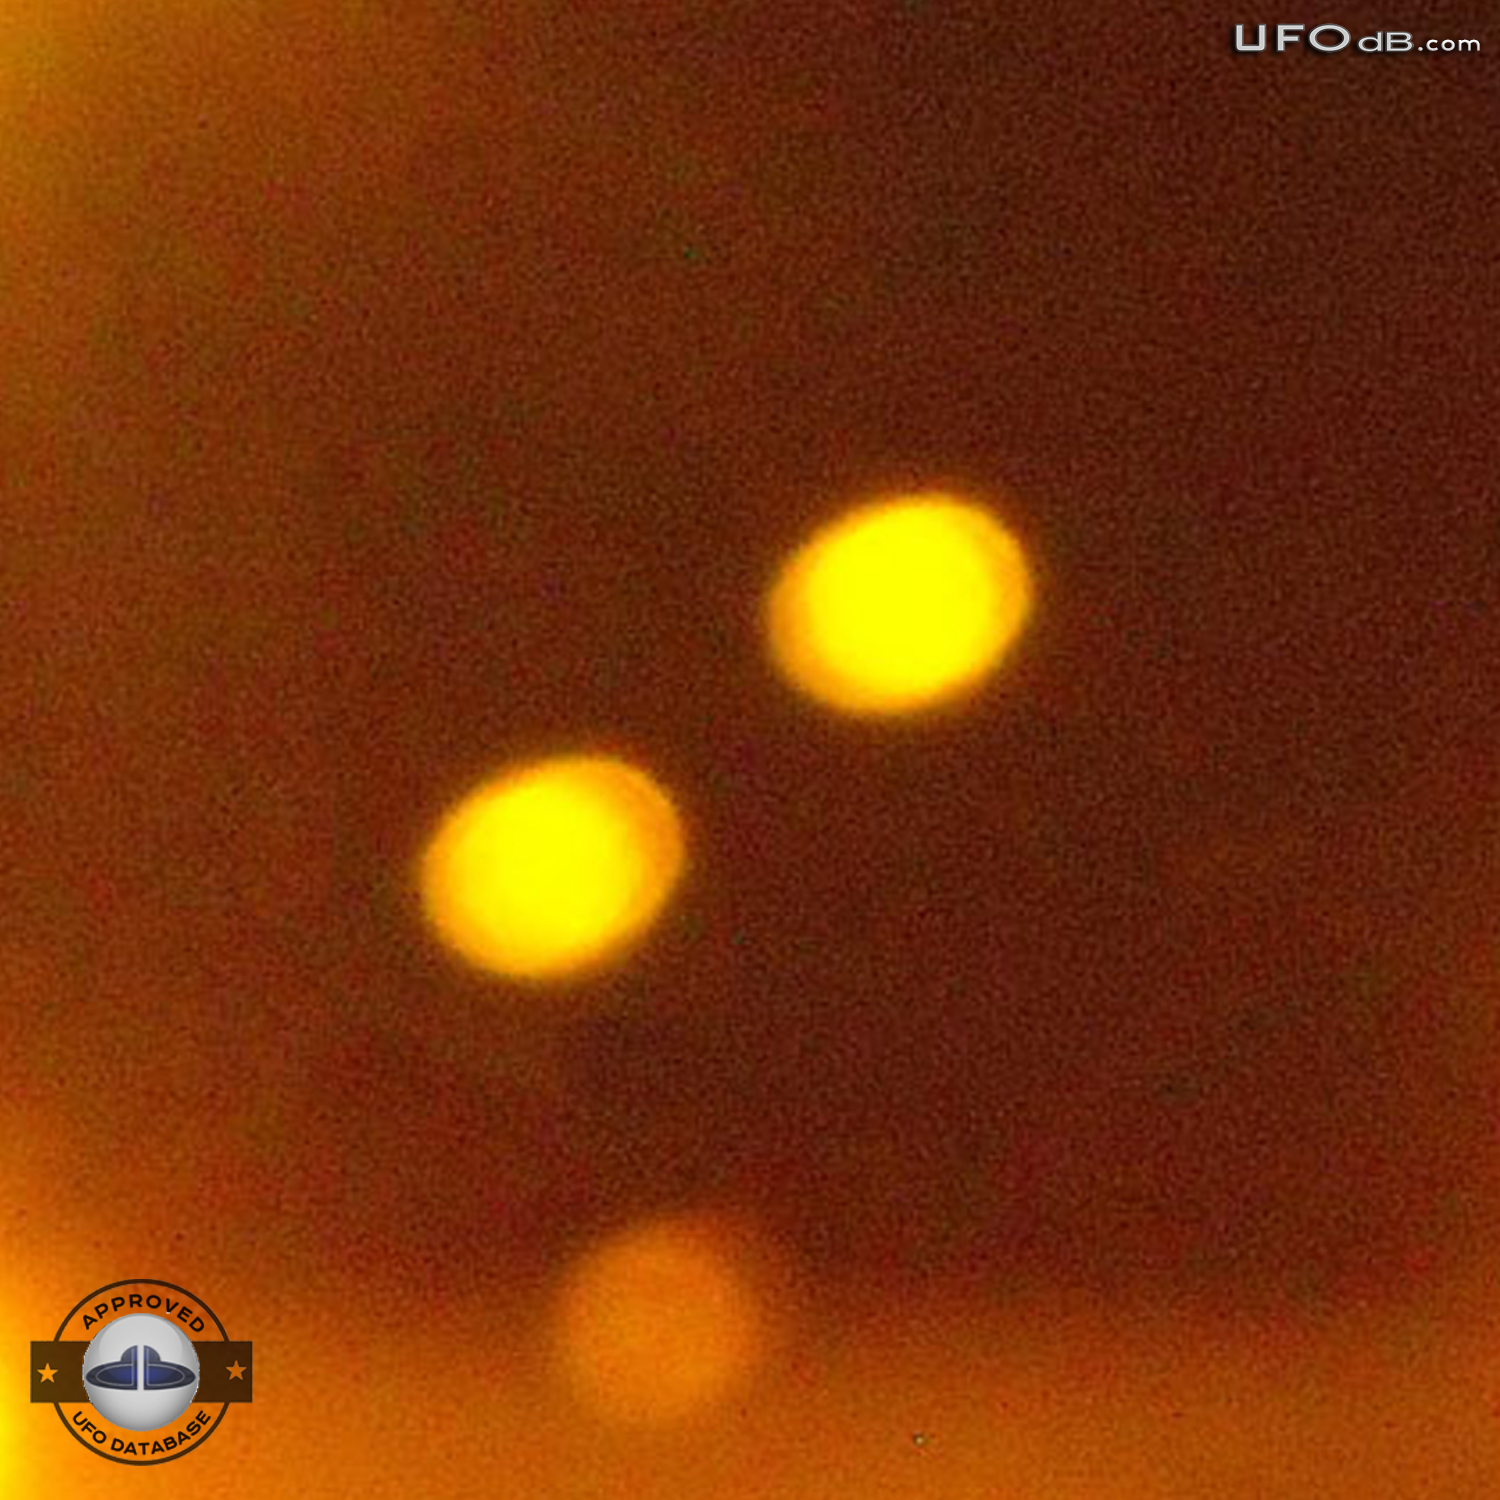 Pulsating Orange UFOs near Fort Carson Army Base | USA | May 12 2011 UFO Picture #310-3